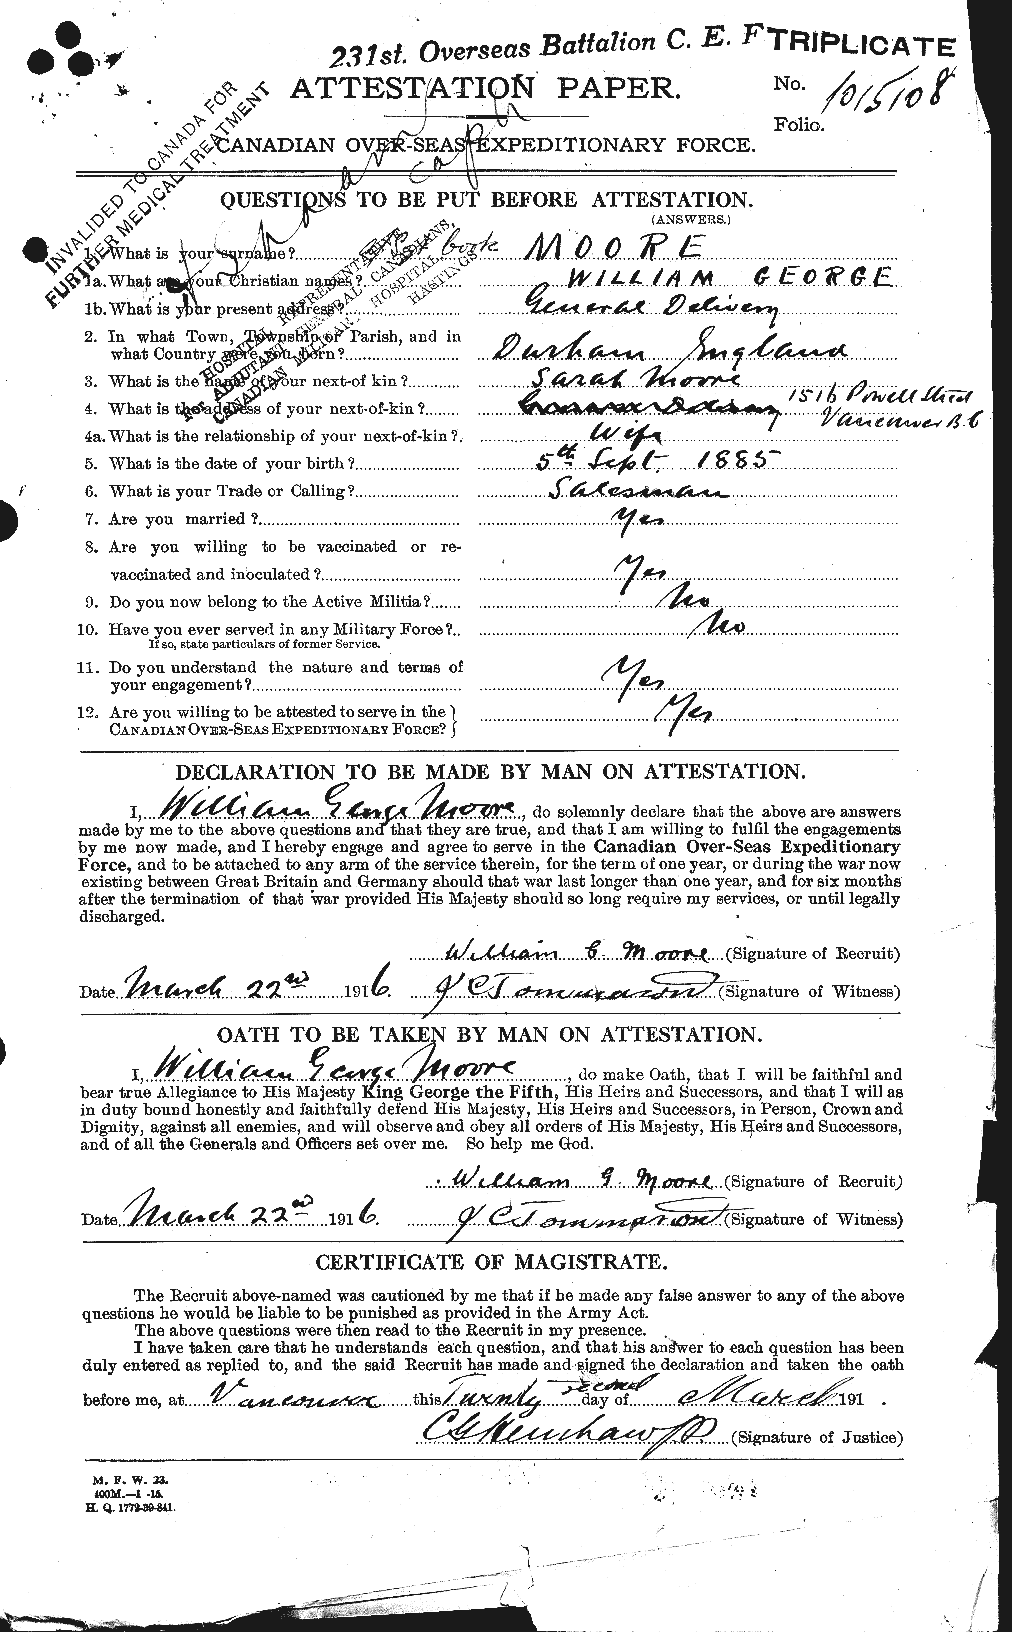 Personnel Records of the First World War - CEF 505811a